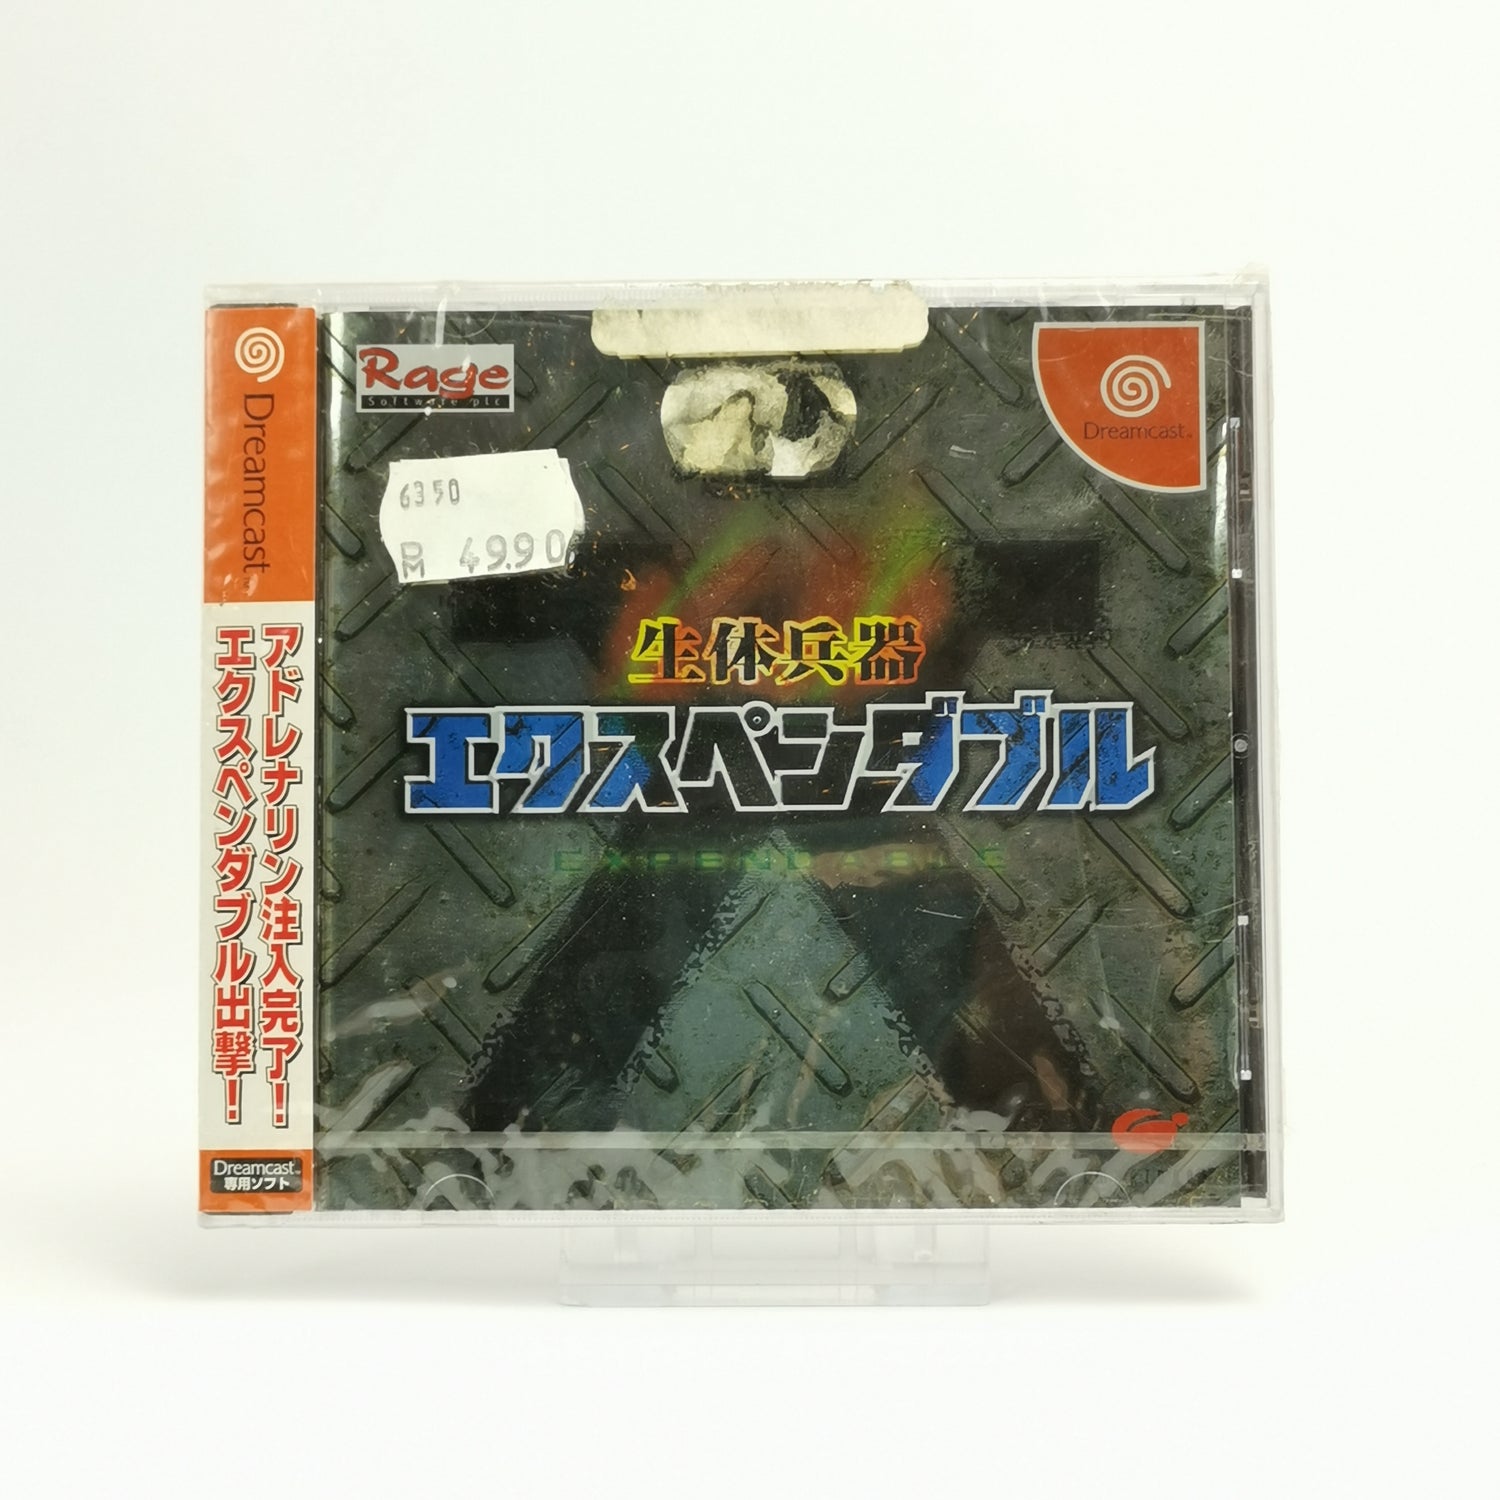 Japanese Sega Dreamcast game: Expendable | DC OVP - NEW NEW SEALED